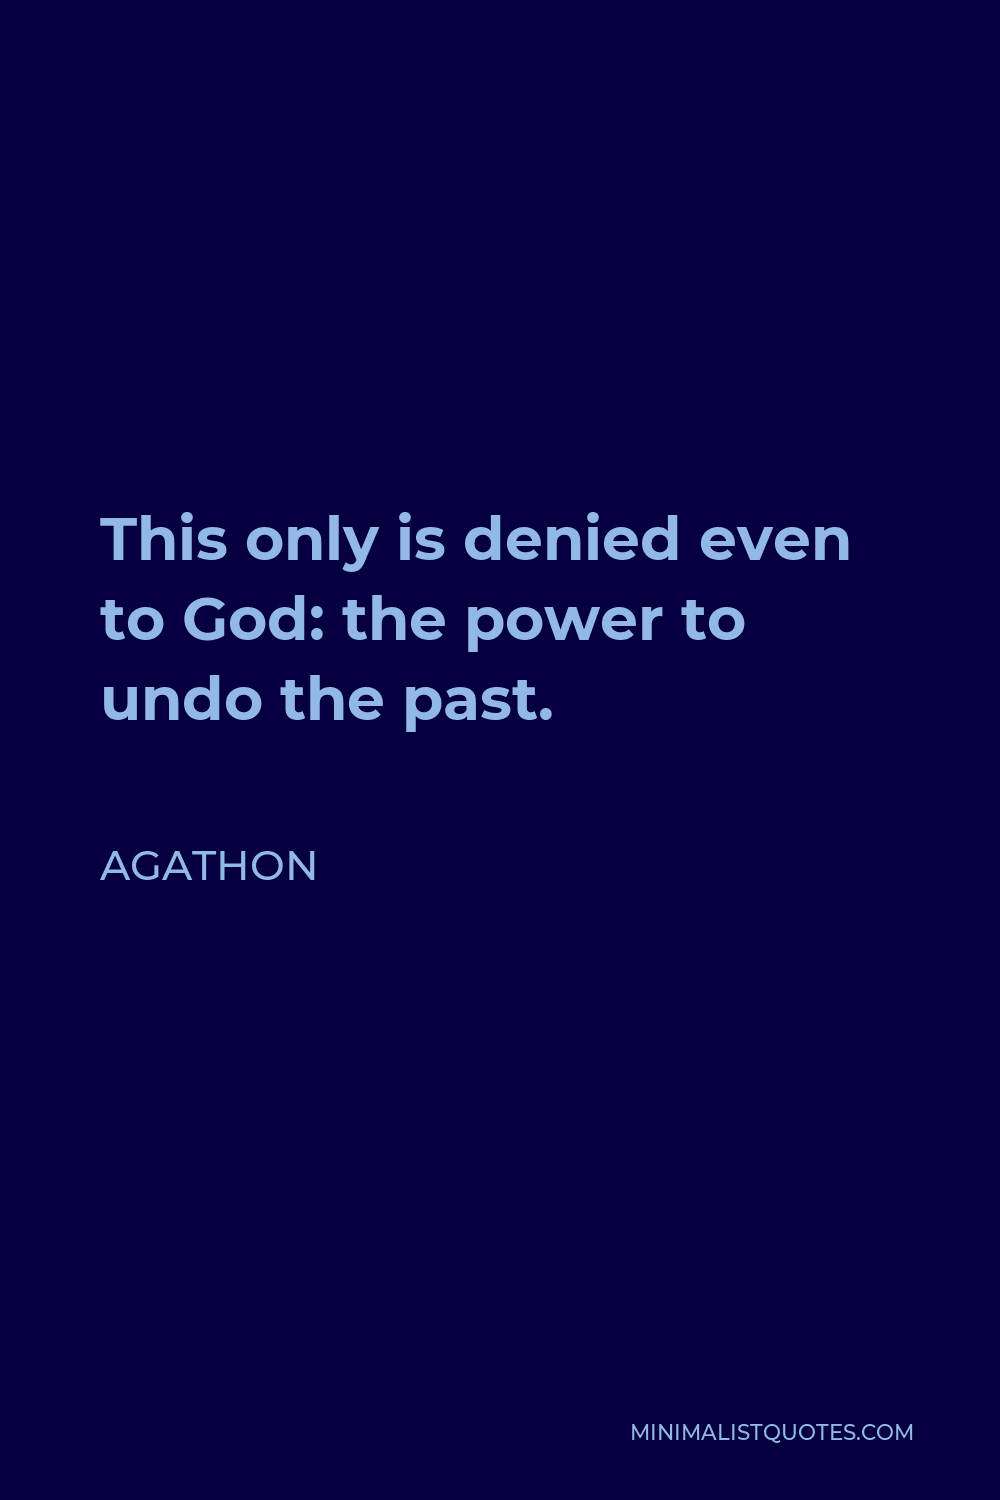 Agathon Quote - This only is denied even to God: the power to undo the past.